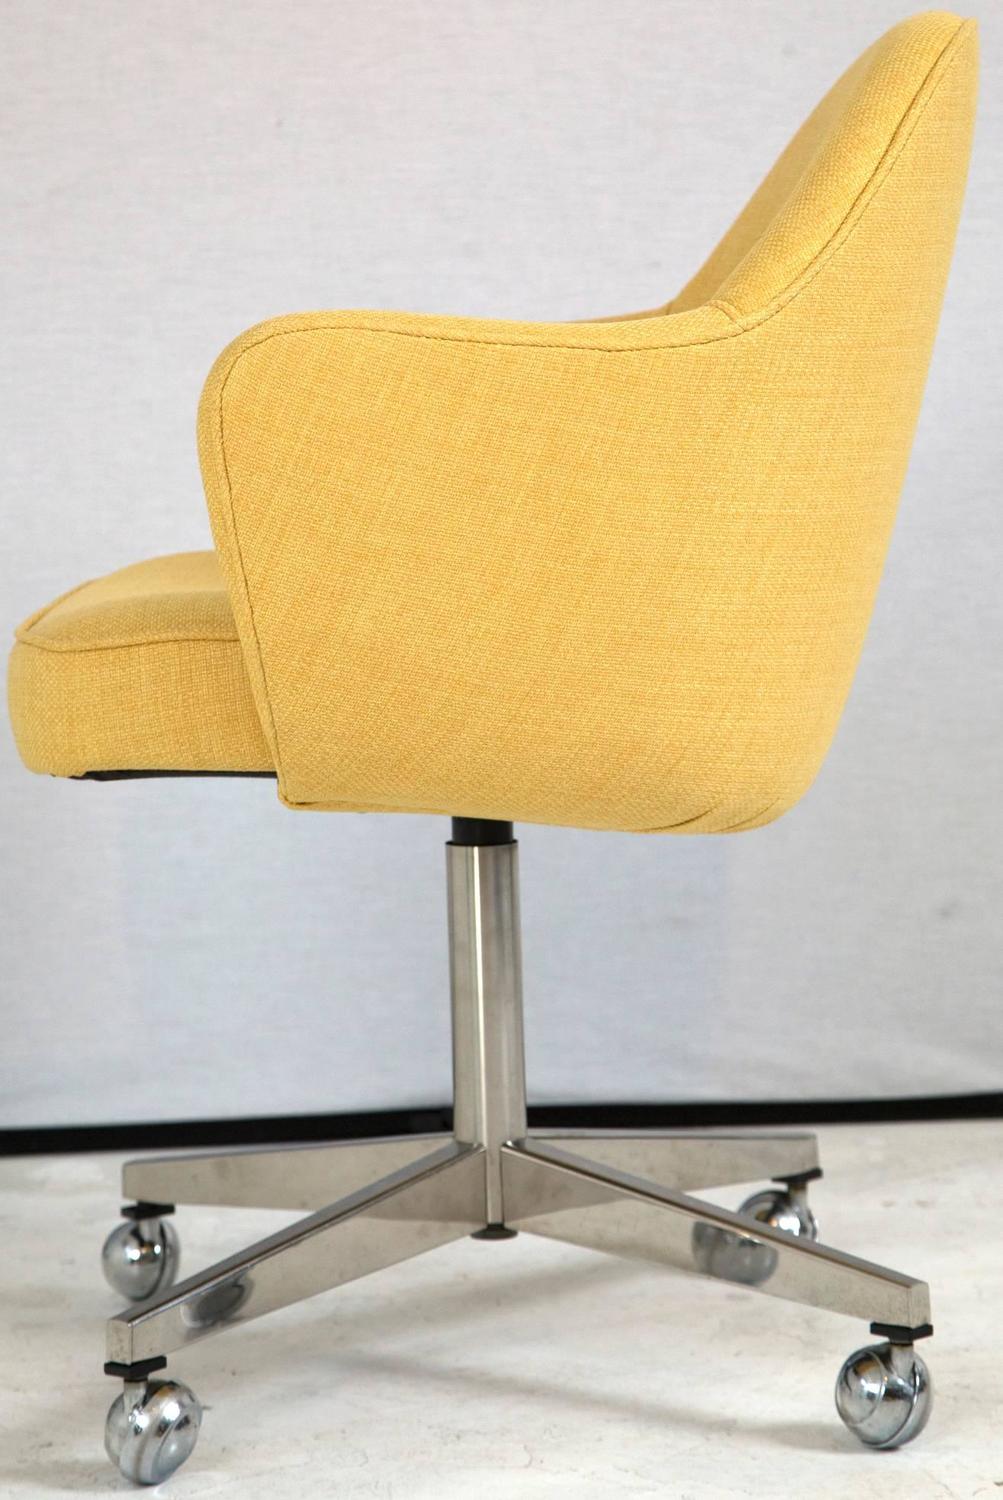 Knoll Desk Chair in Yellow Microfiber For Sale at 1stdibs